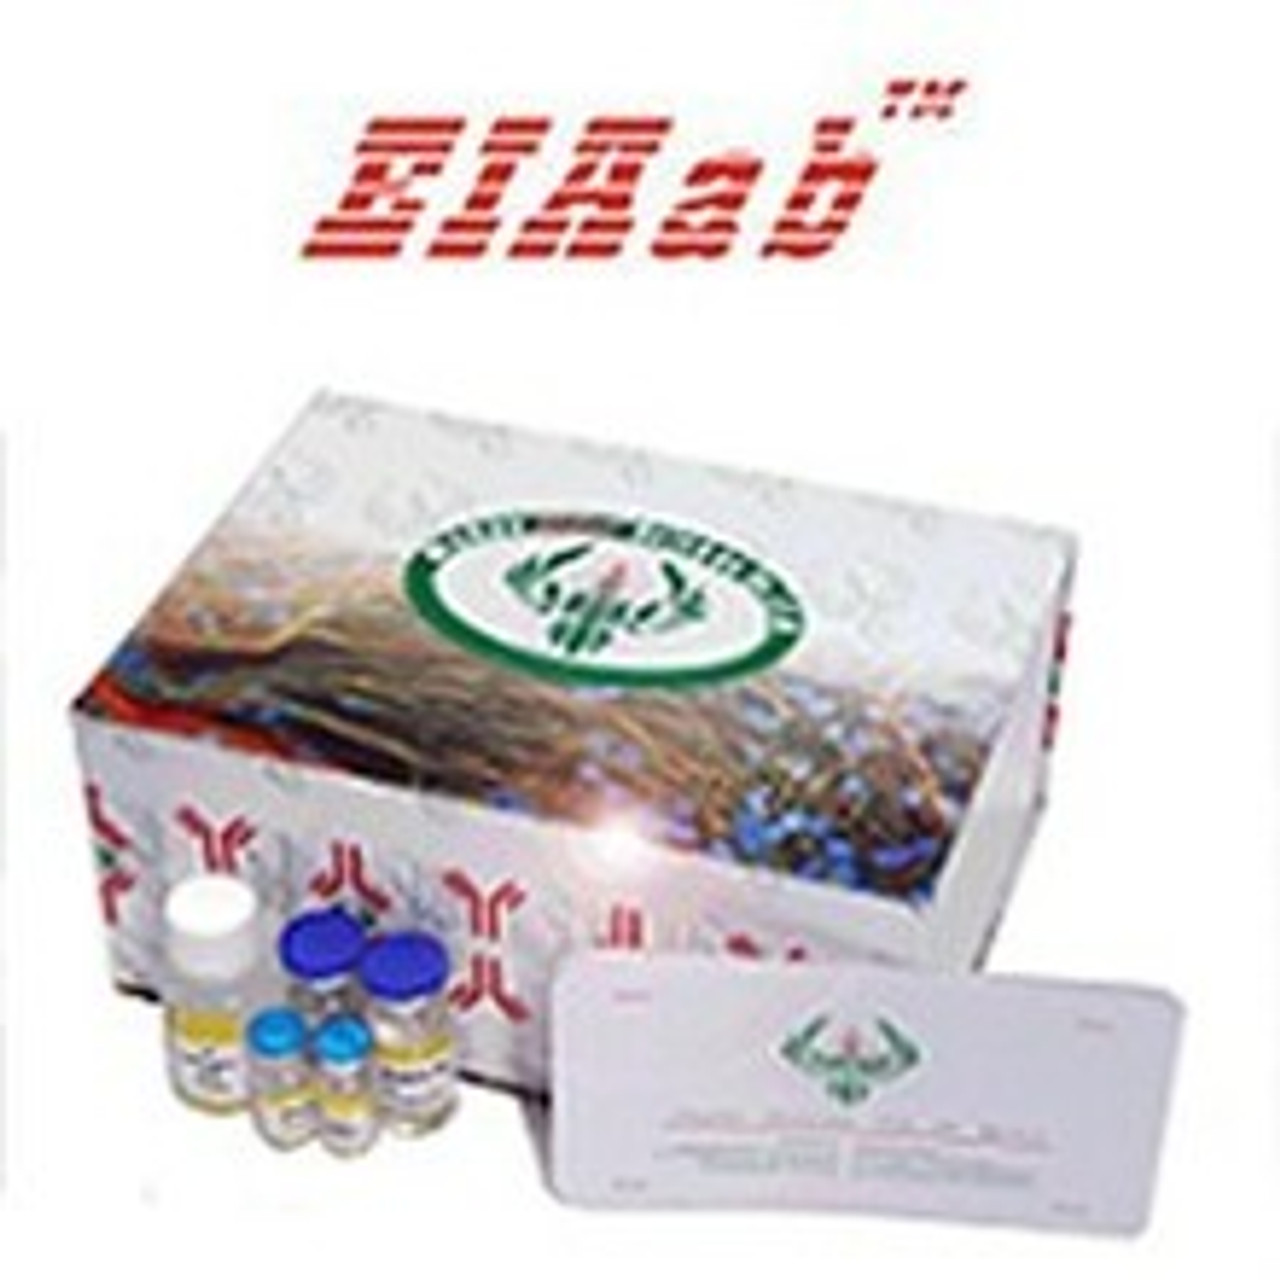 Bovine ATG9A/Autophagy-related protein 9A ELISA Kit